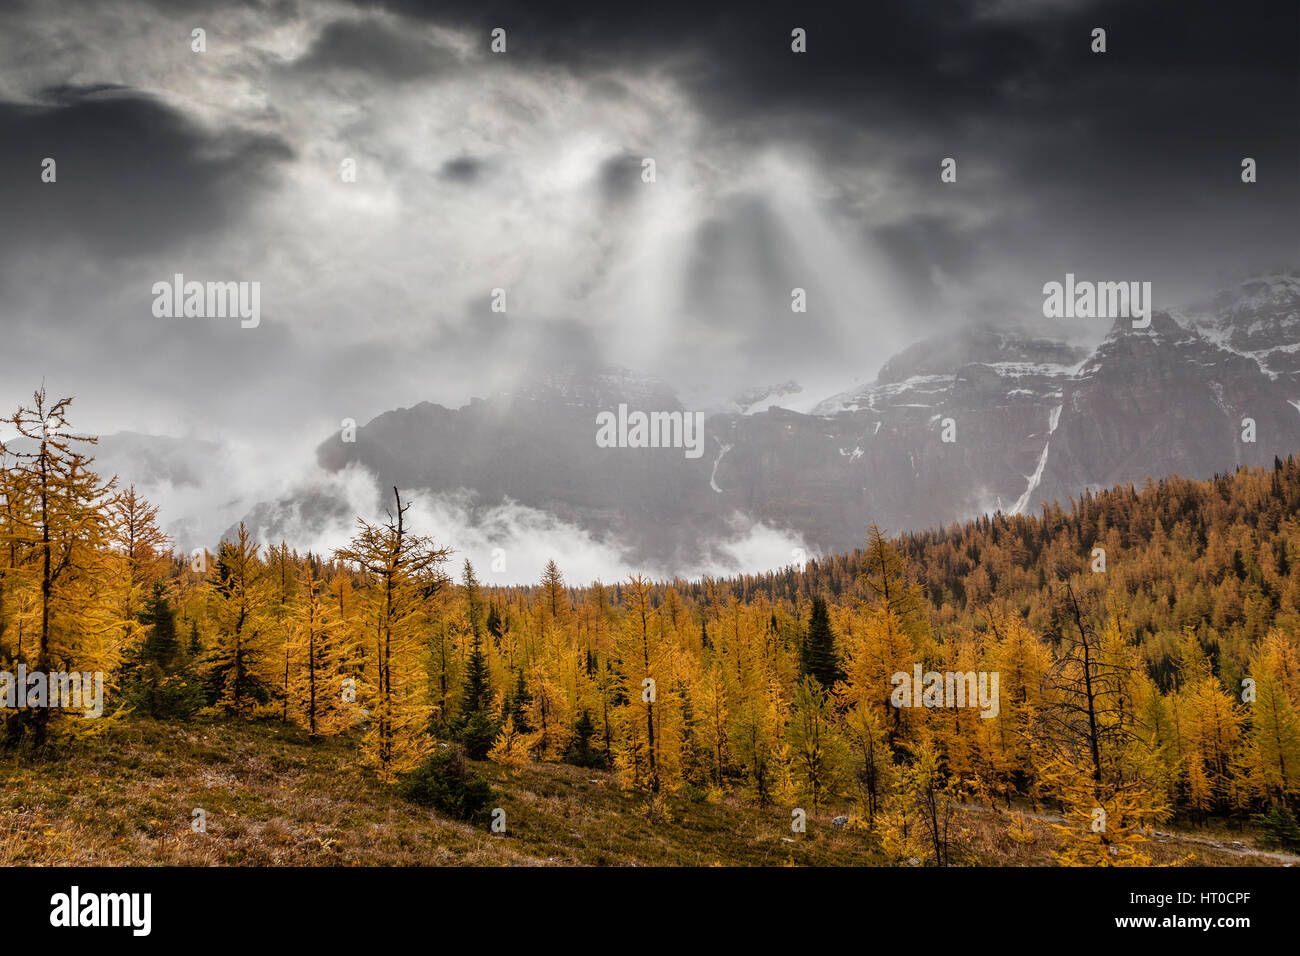 Golden larch trees dot the autumn landscape of Larch Valley near Lake Louise, Alberta, Canada. The sun's rays break through a cloudy day as fog surrou Stock Photo